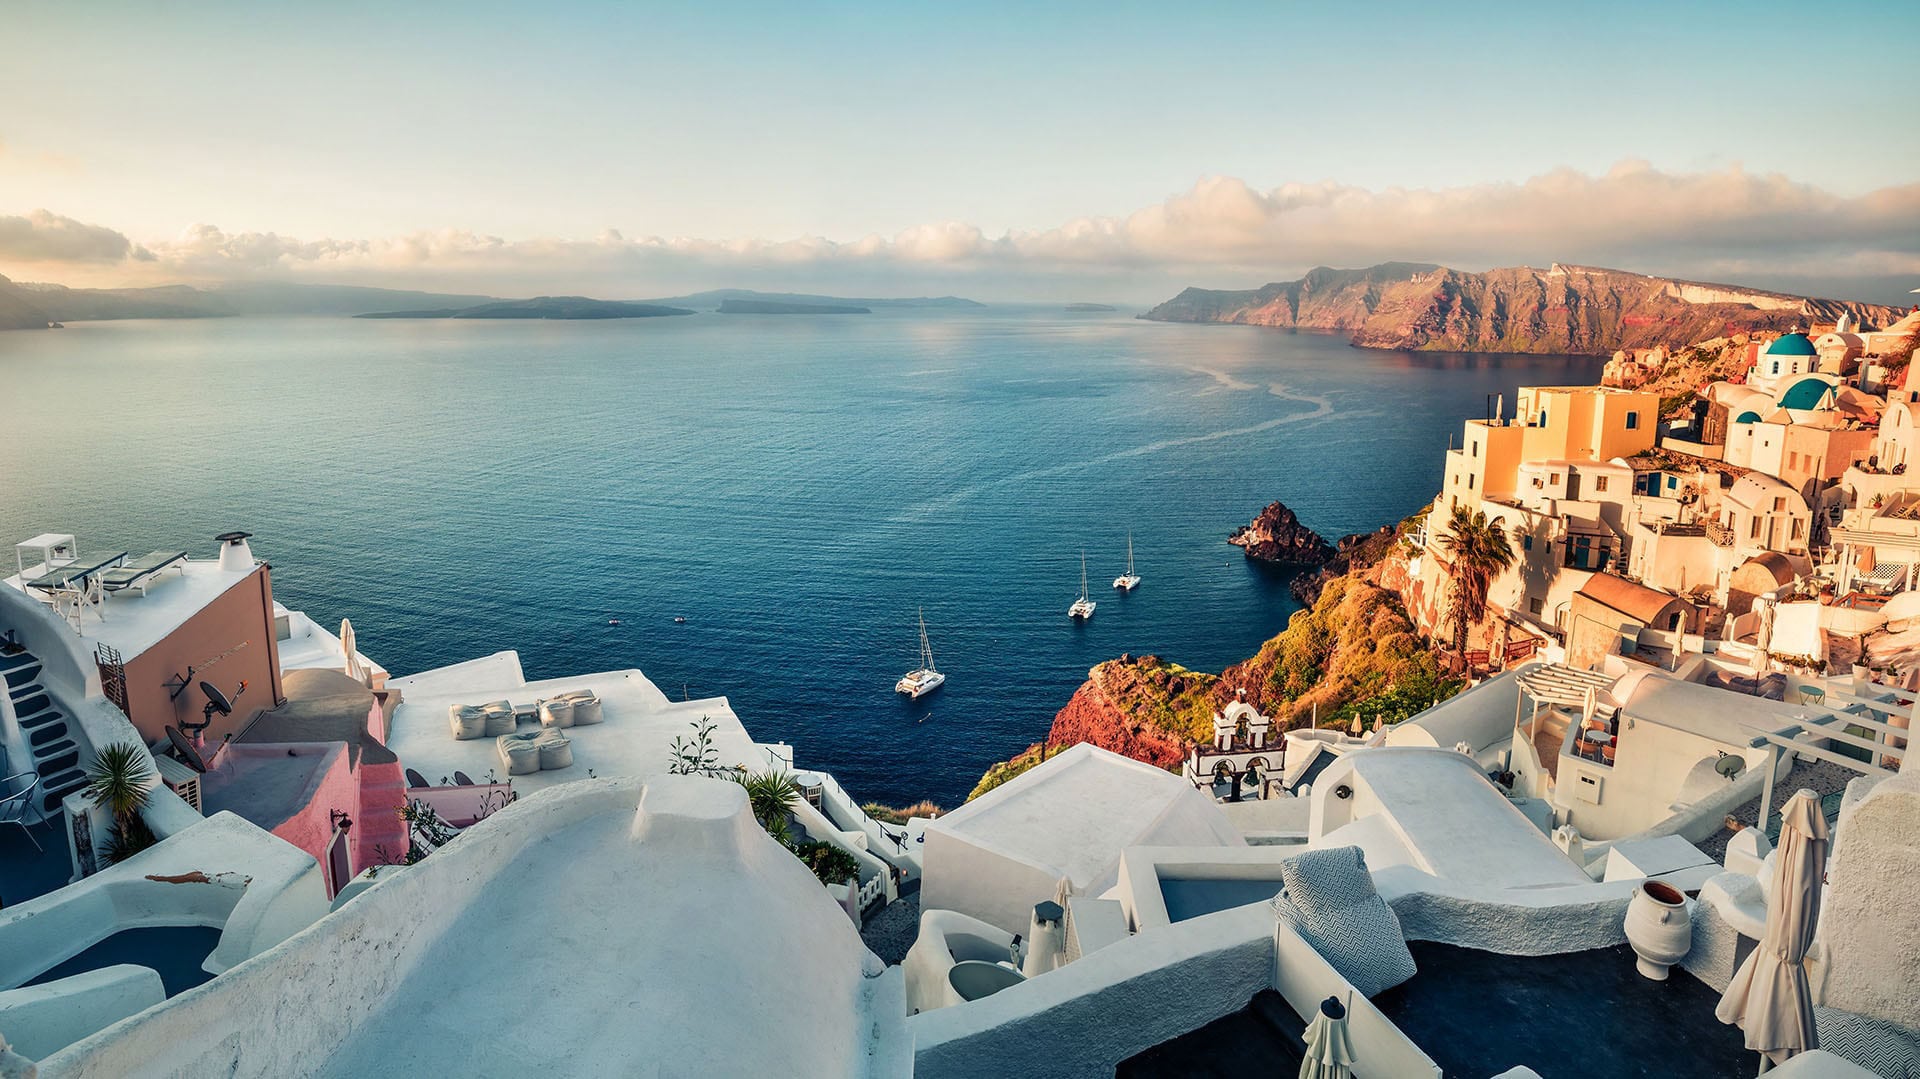            SANTORINI & BEYOND                    One-of-a-kind catamaran cruise for the adventurous                   Book your day cruise           